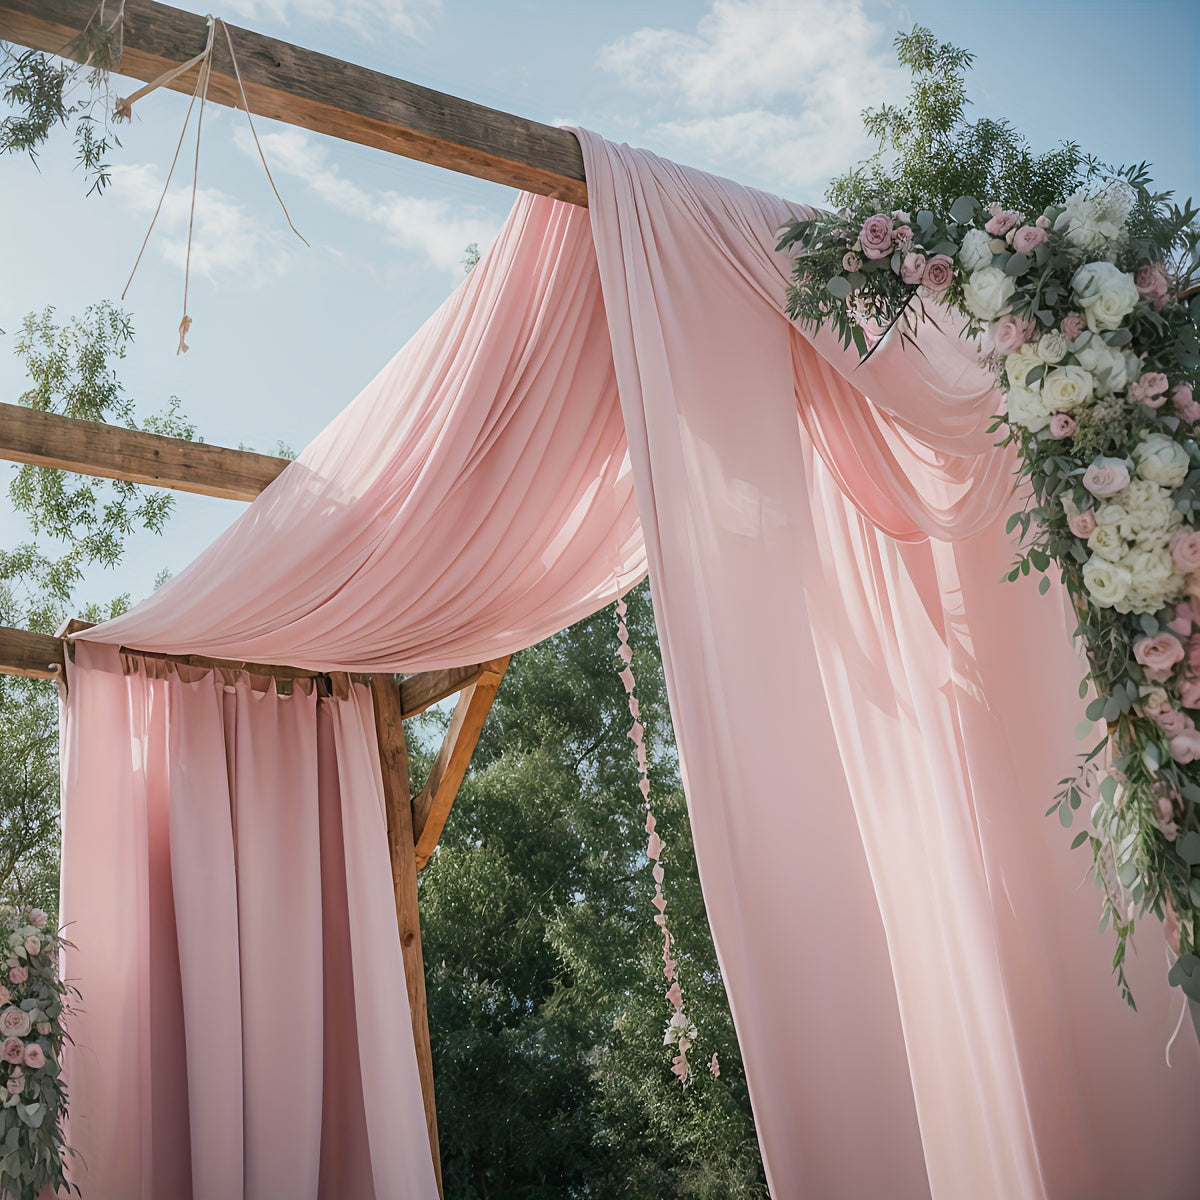 a pink drape draped over a wooden structure